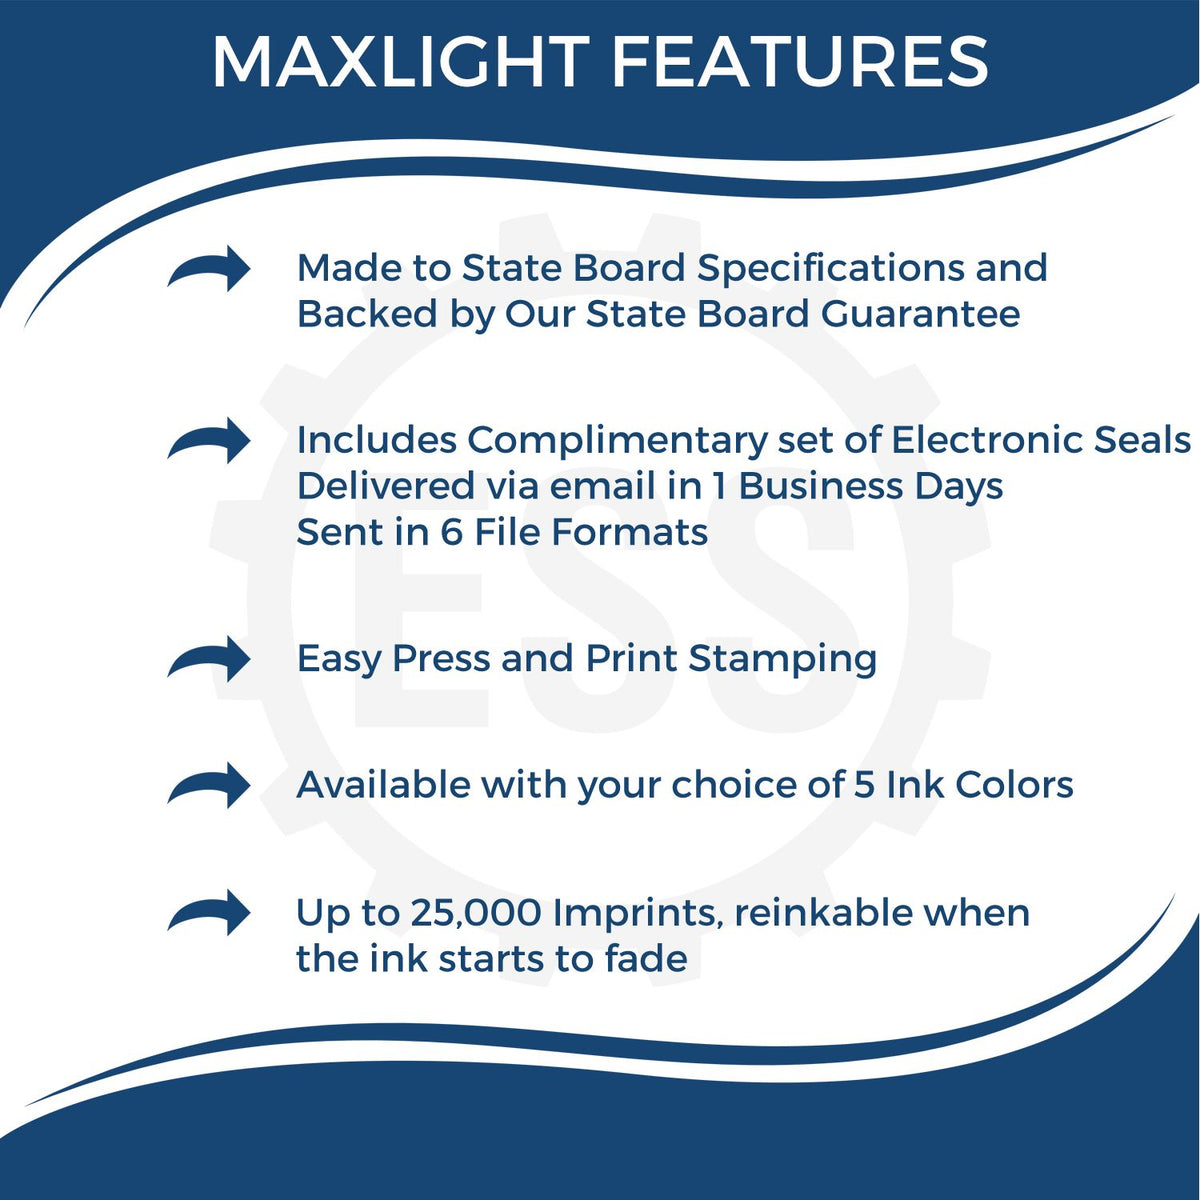 A picture of an infographic highlighting the selling points for the MaxLight Premium Pre-Inked Georgia Rectangular Notarial Stamp